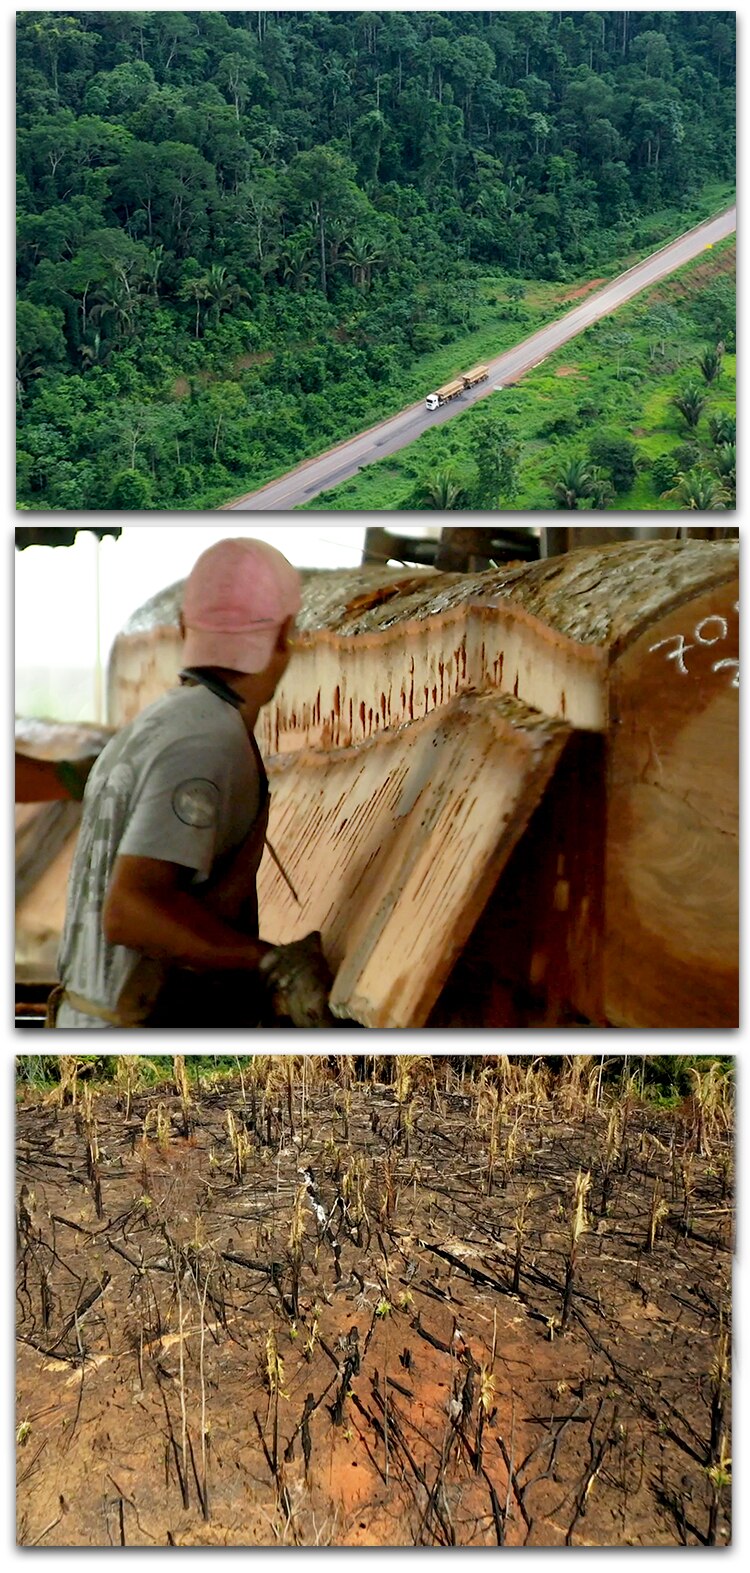 Illegal logging of protected trees has become rife in the Amazon.